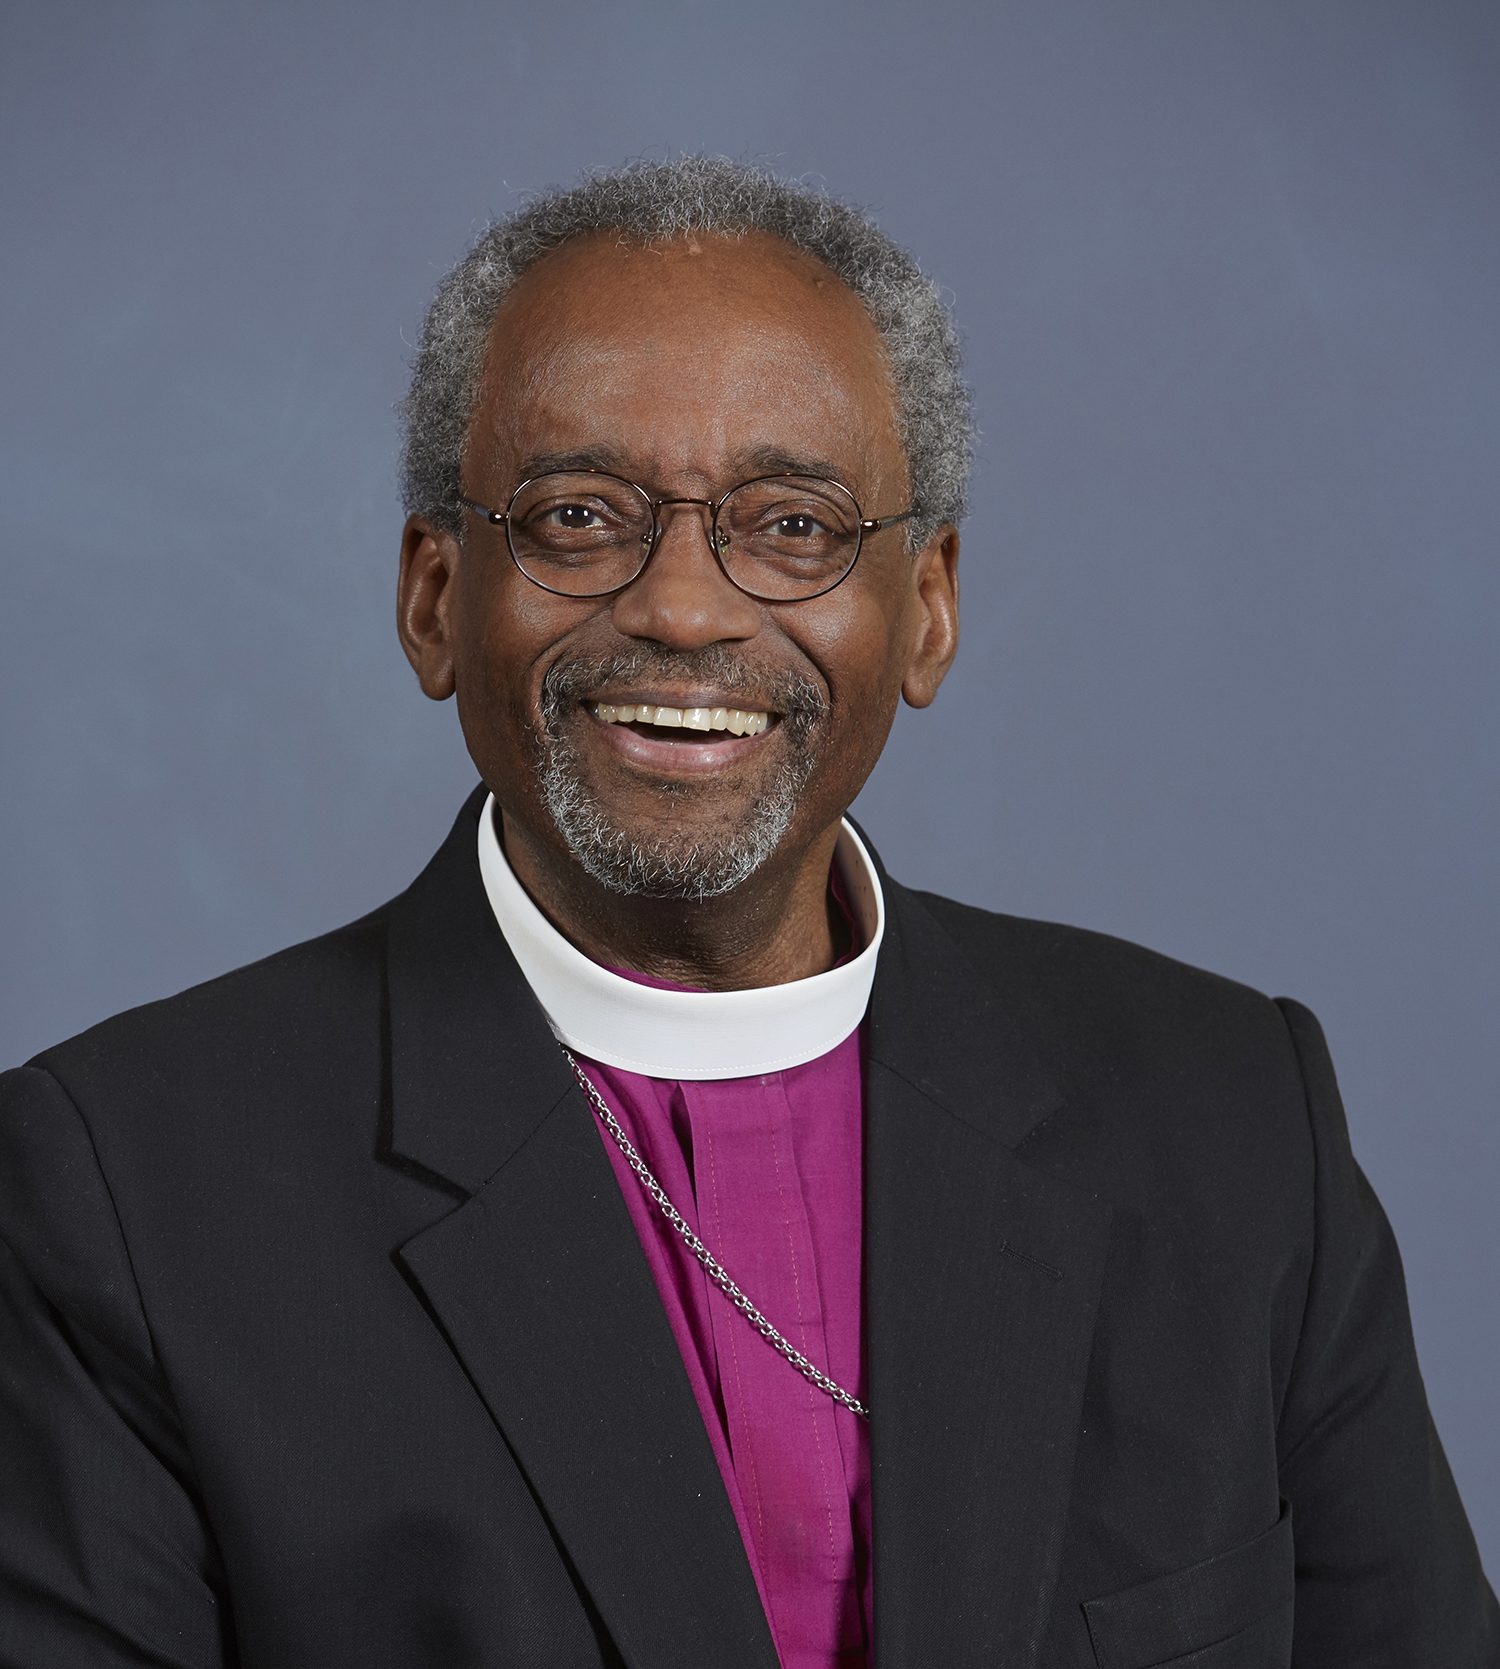 Biography: The Most Rev. Michael Curry